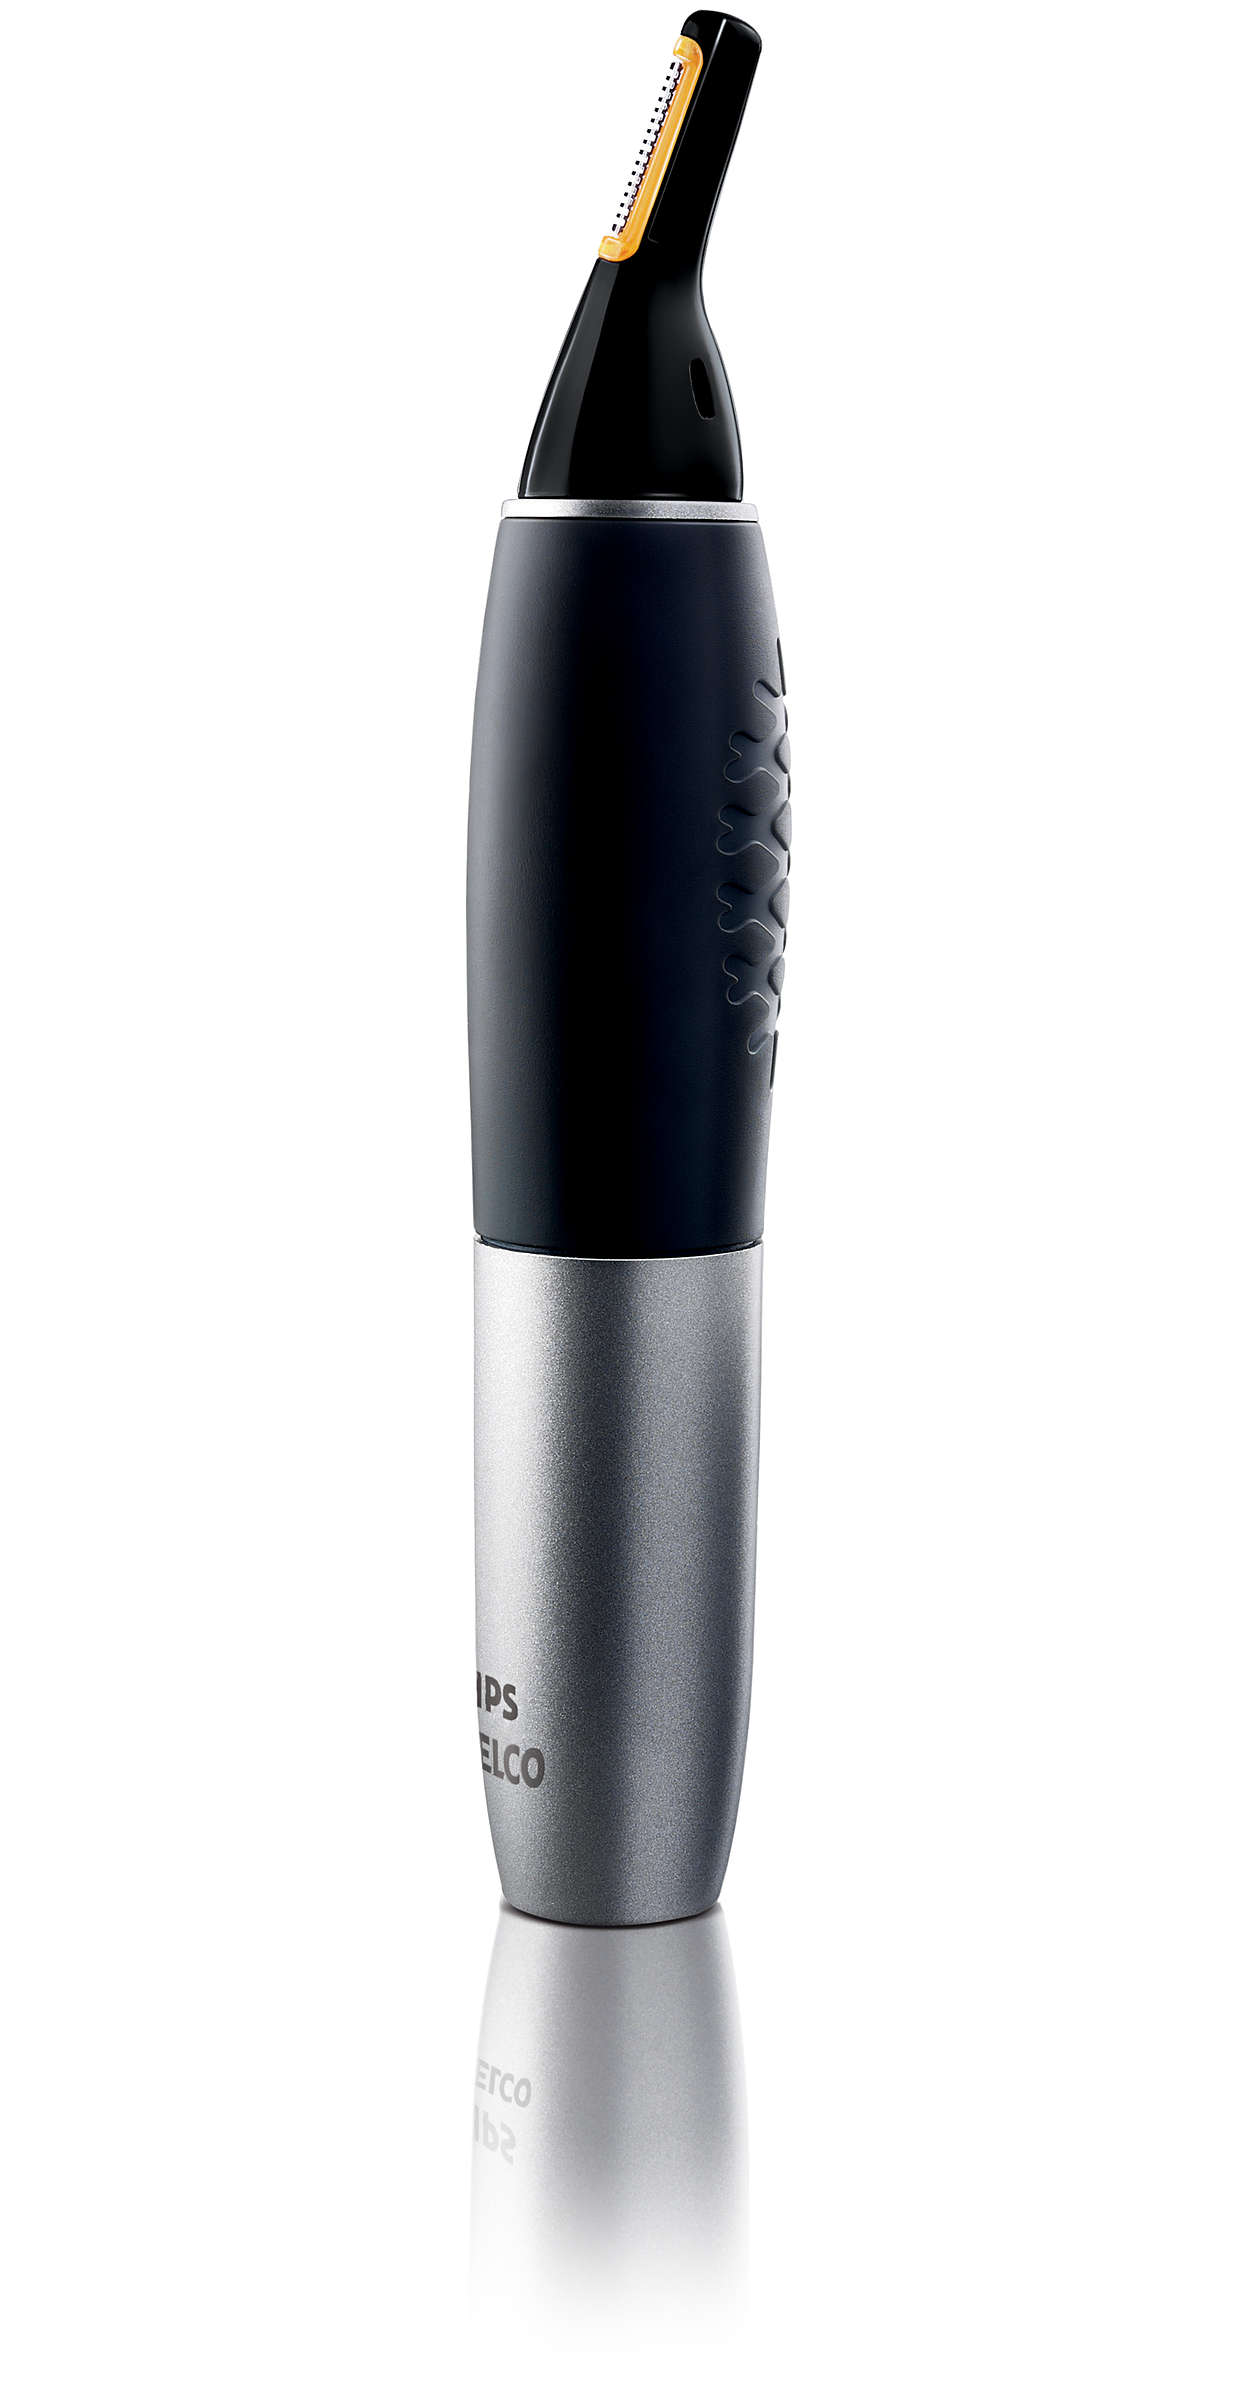 3-in-1 nose, ear, and eyebrow trimmer